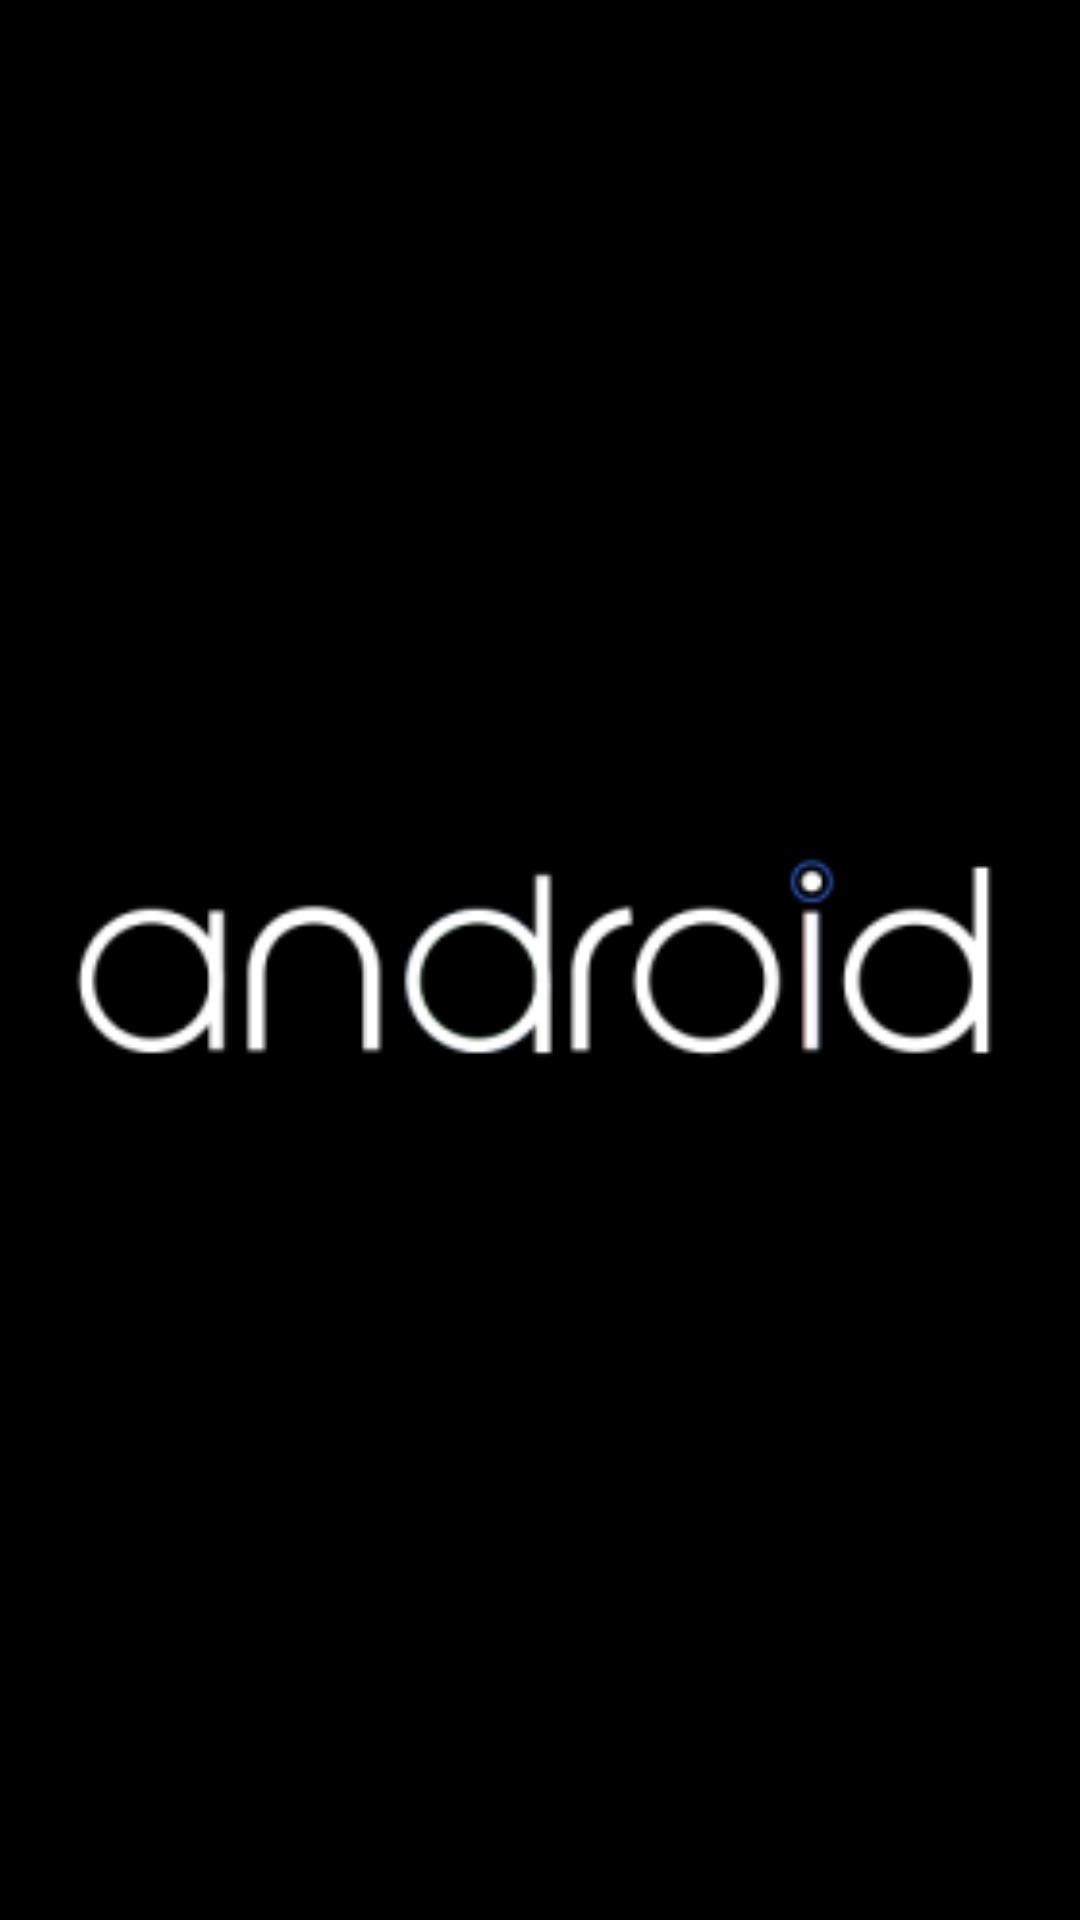 New Android Logo? Install the LG G Watch Boot Animation on Your Nexus 5 & See for Yourself